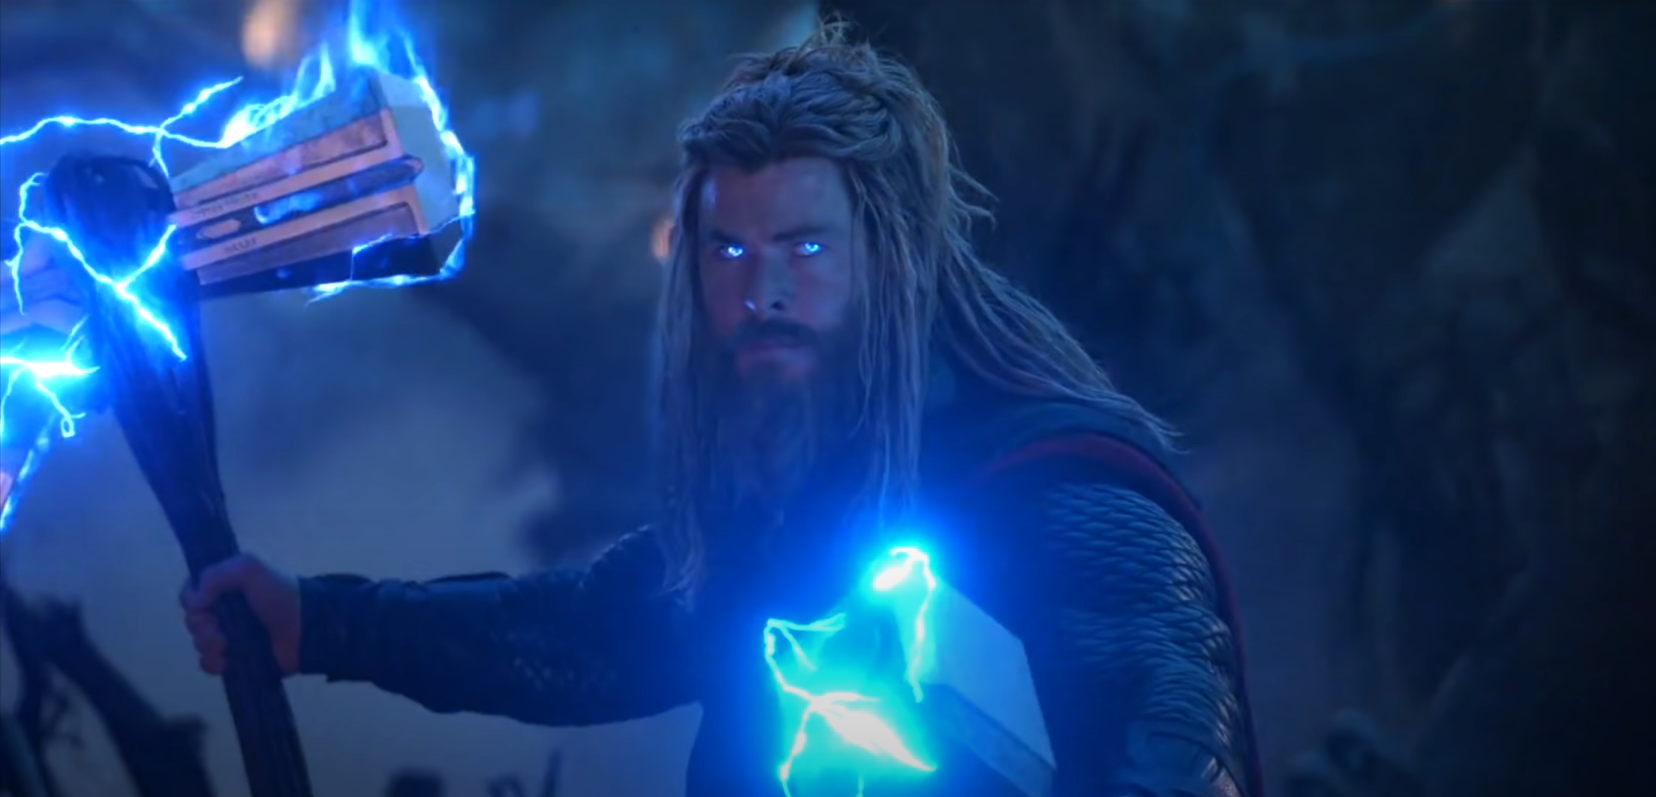 The "Thor 4" movie trailer set a record before the premiere